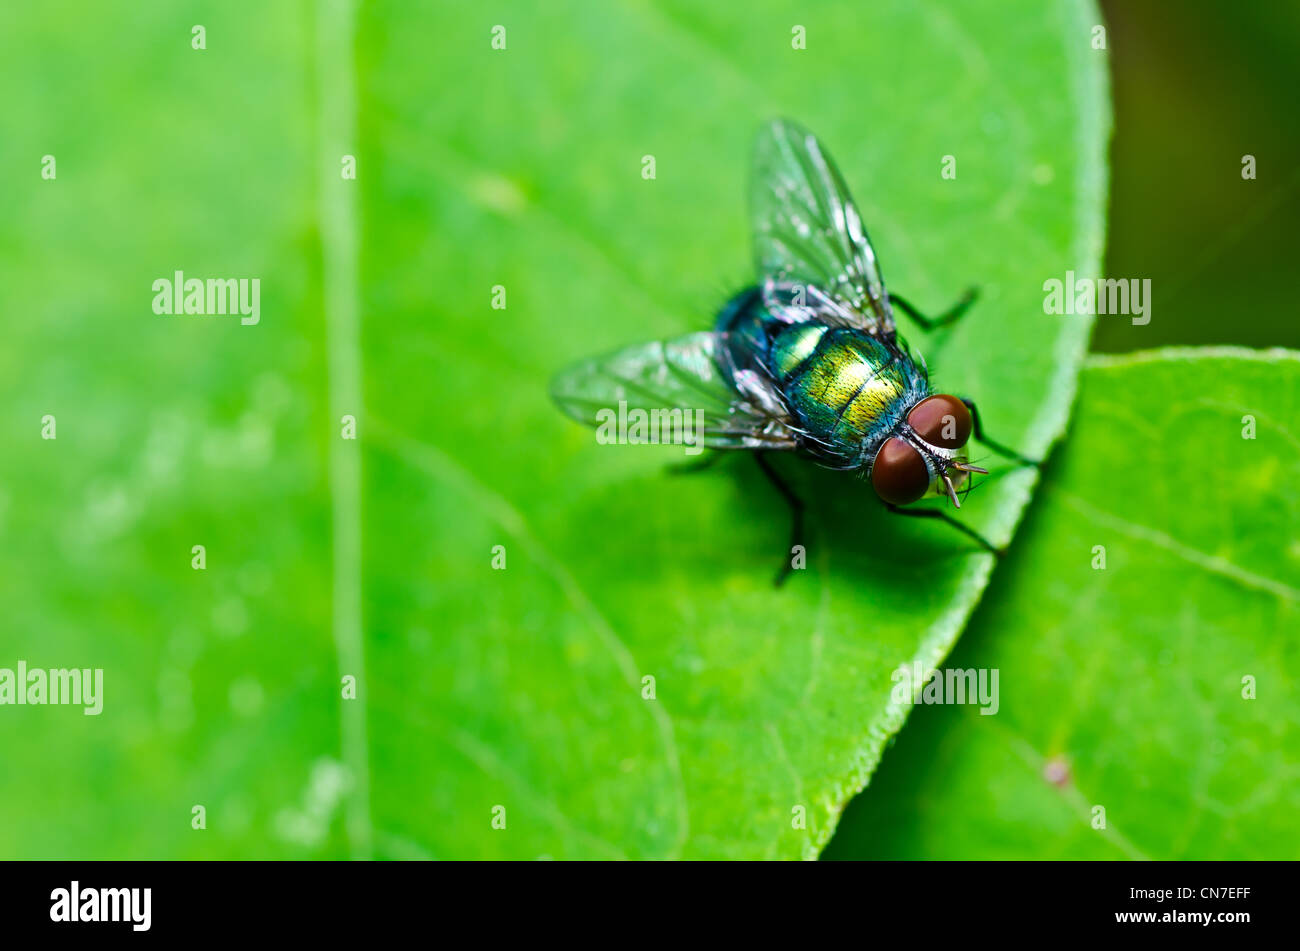 fly in green nature or in the city Stock Photo